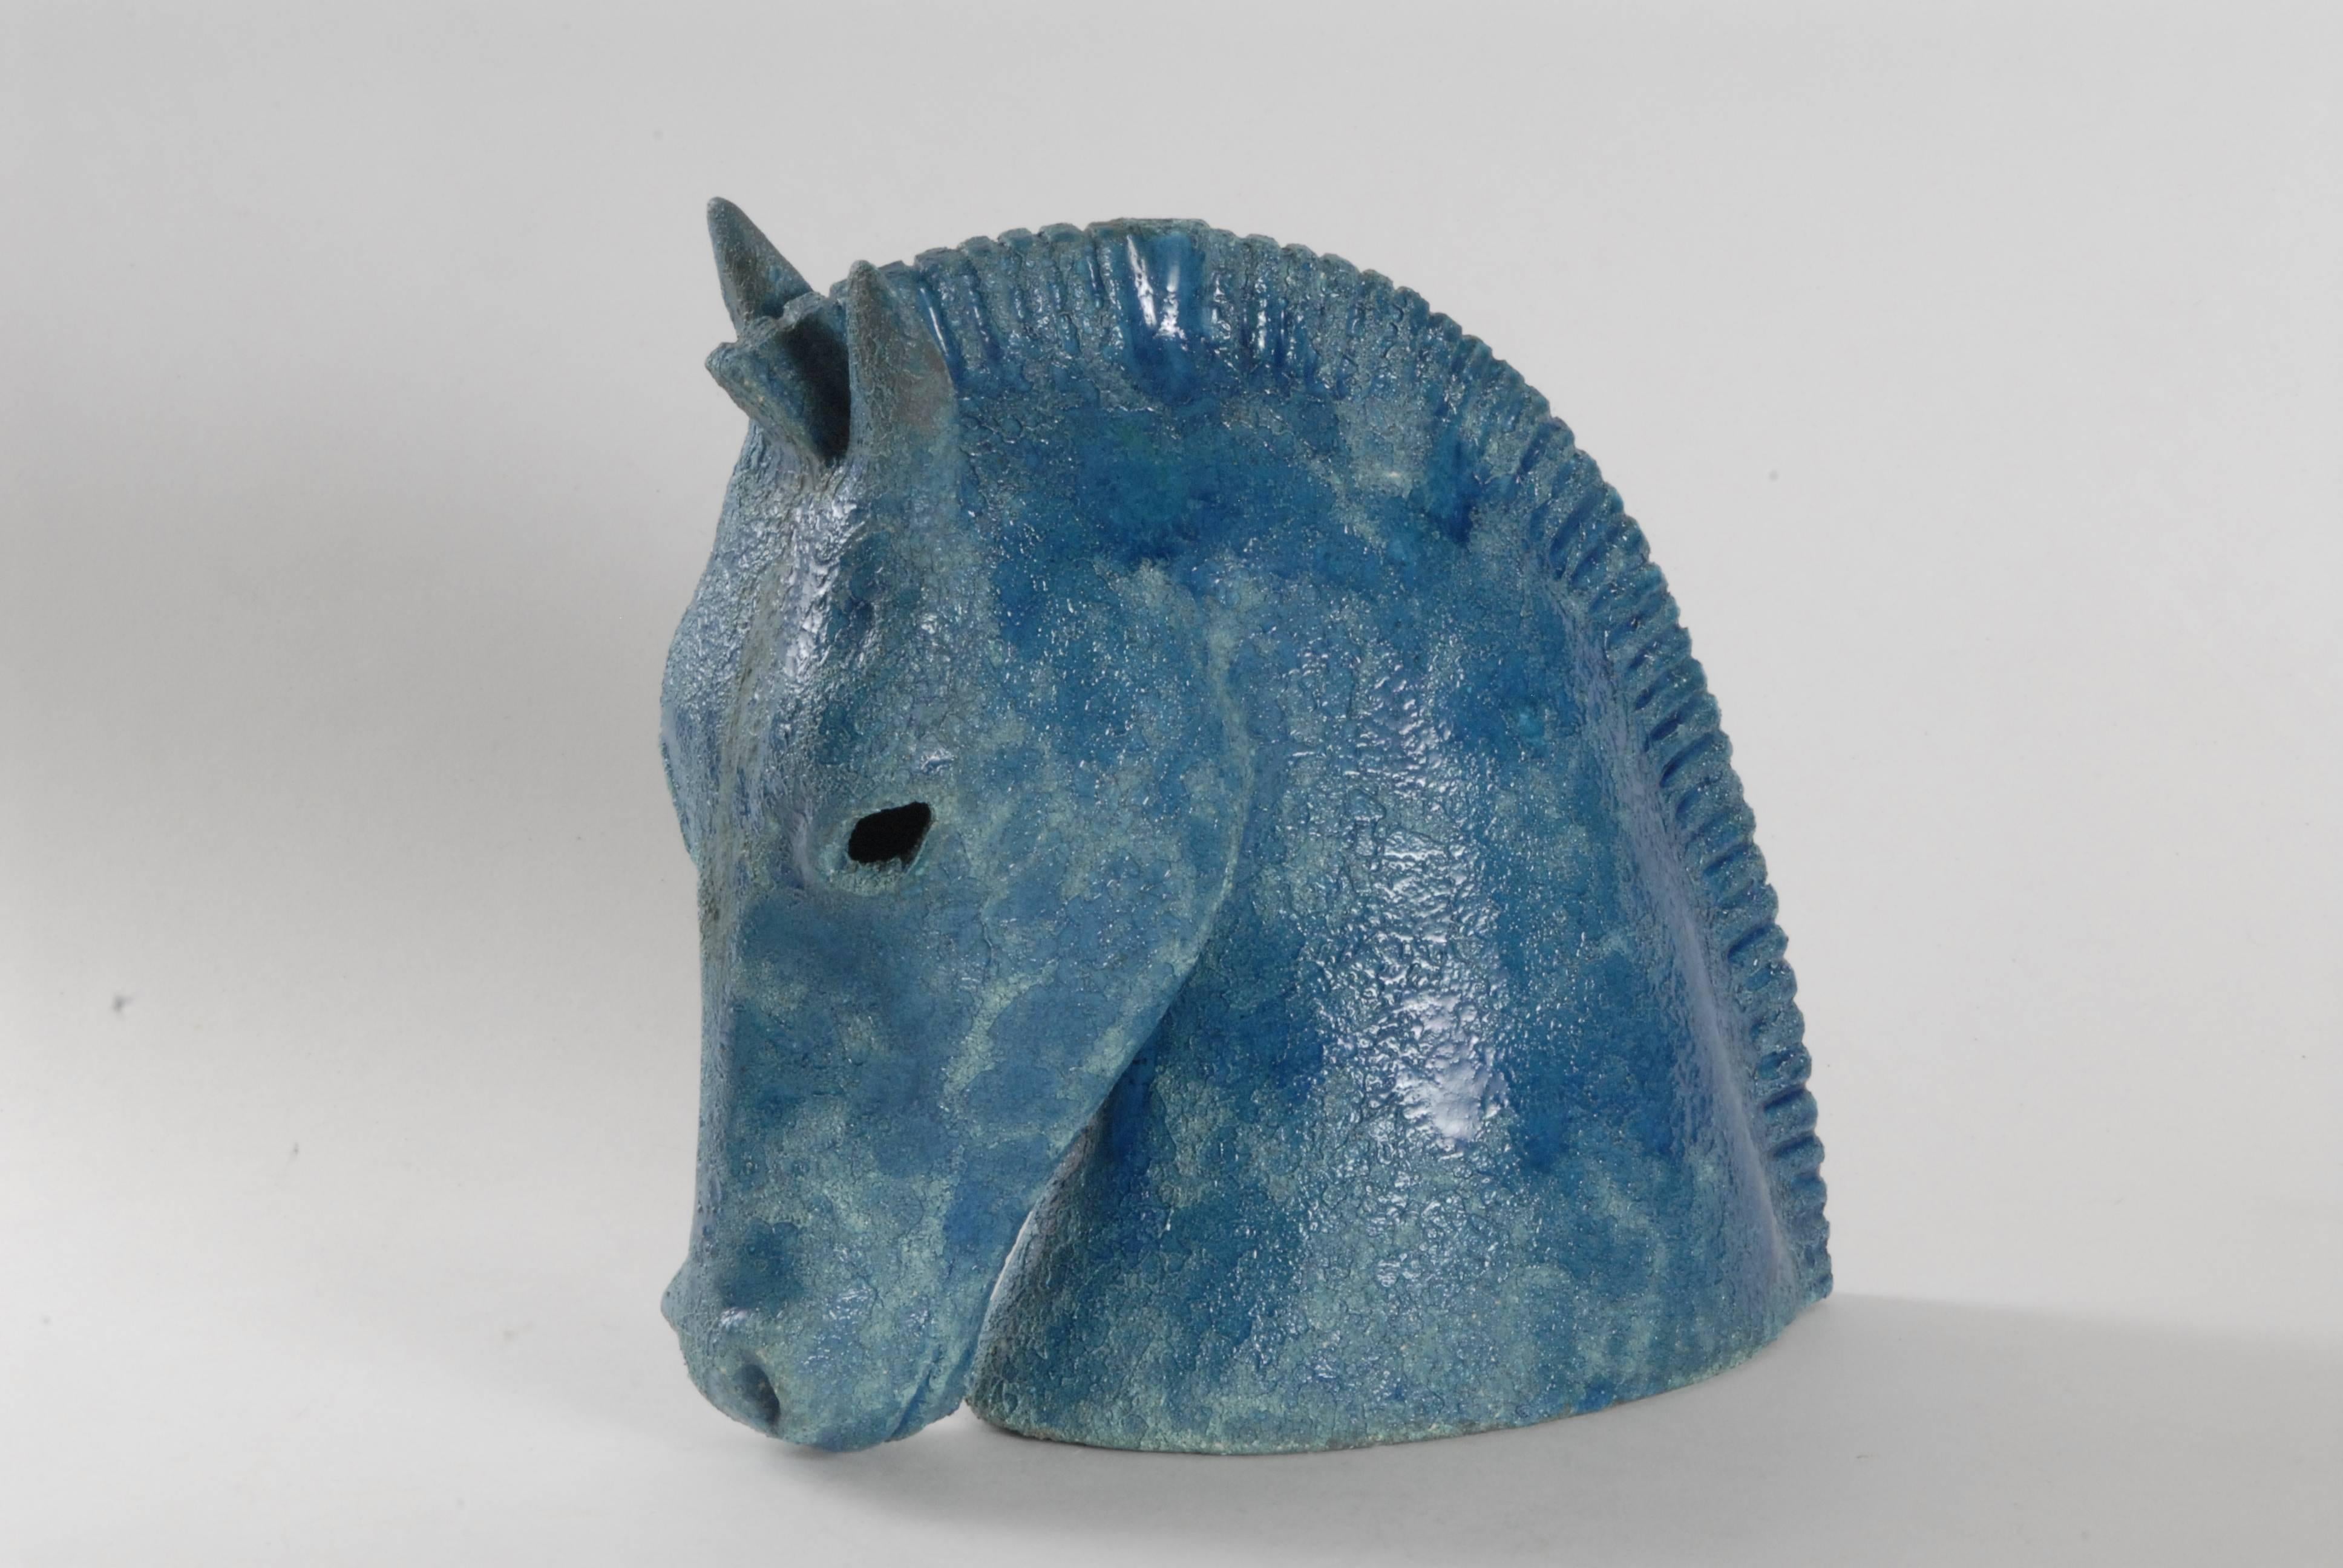 An Aldo Londi for Bitossi 'Cinese' [Chinese] glaze large horse head in blue. Made as a lamp base but never used as such, in lovely condition.